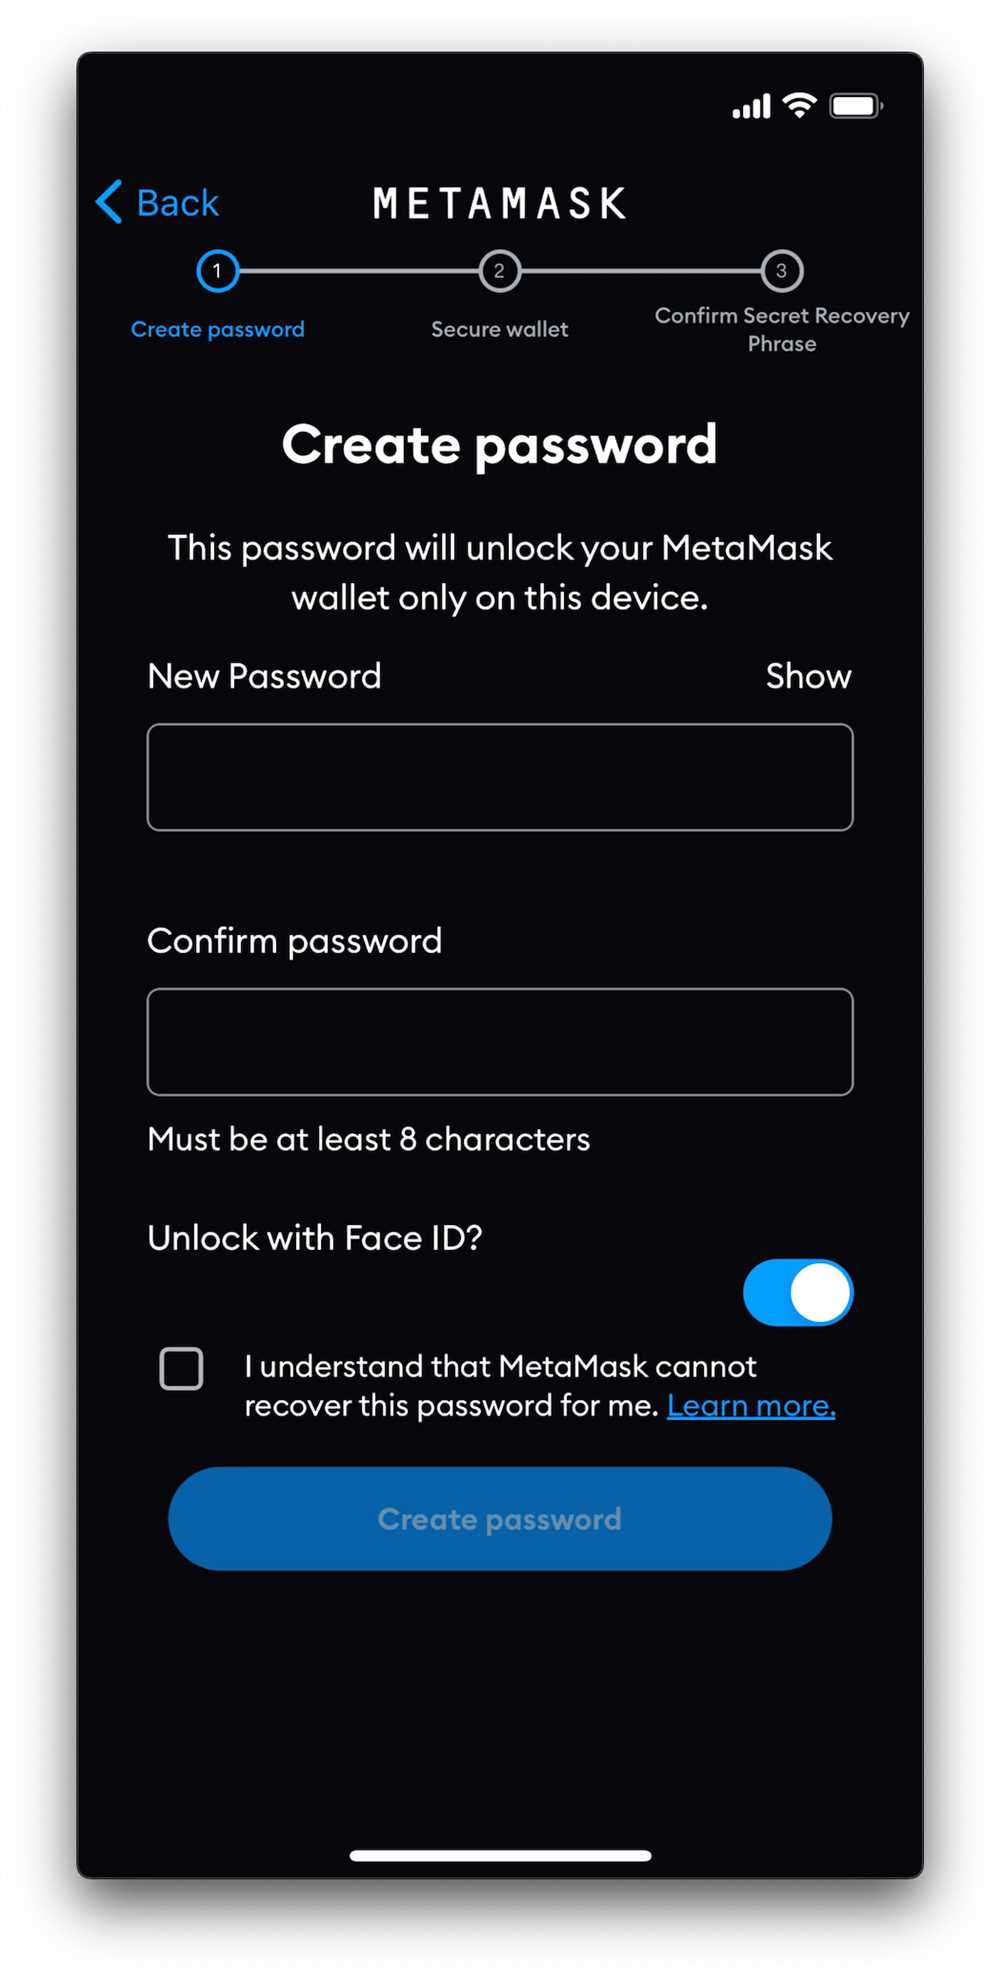 Step-by-Step Guide: How to Enter Secret Recovery Phrase on MetaMask Mobile